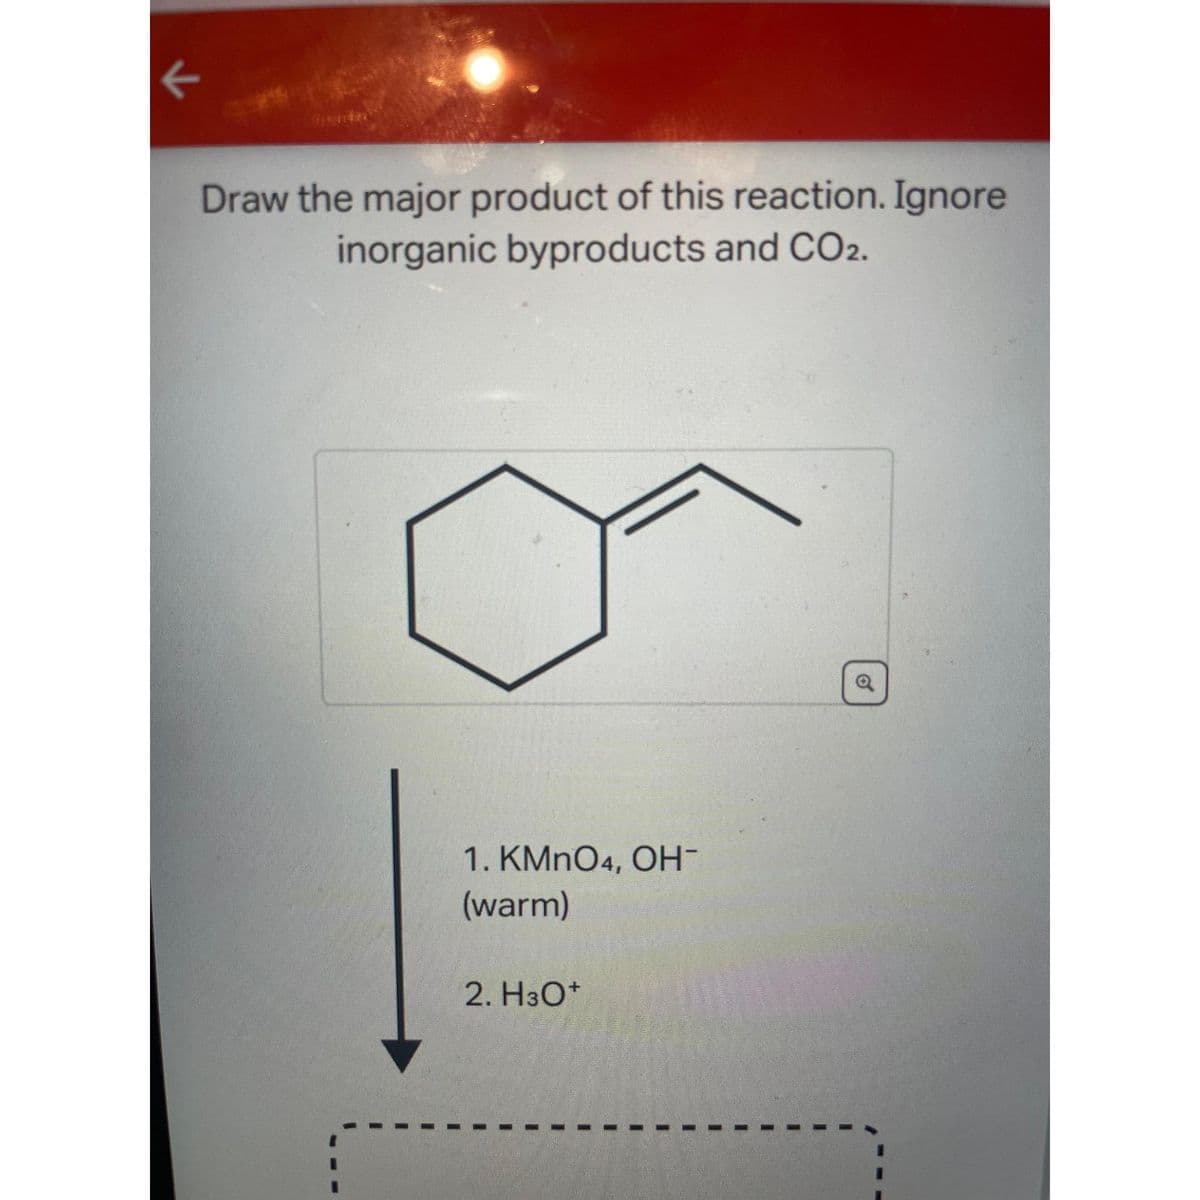 ←
Draw the major product of this reaction. Ignore
inorganic byproducts and CO2.
1. KMnO4, OH-
(warm)
2. H3O+
o